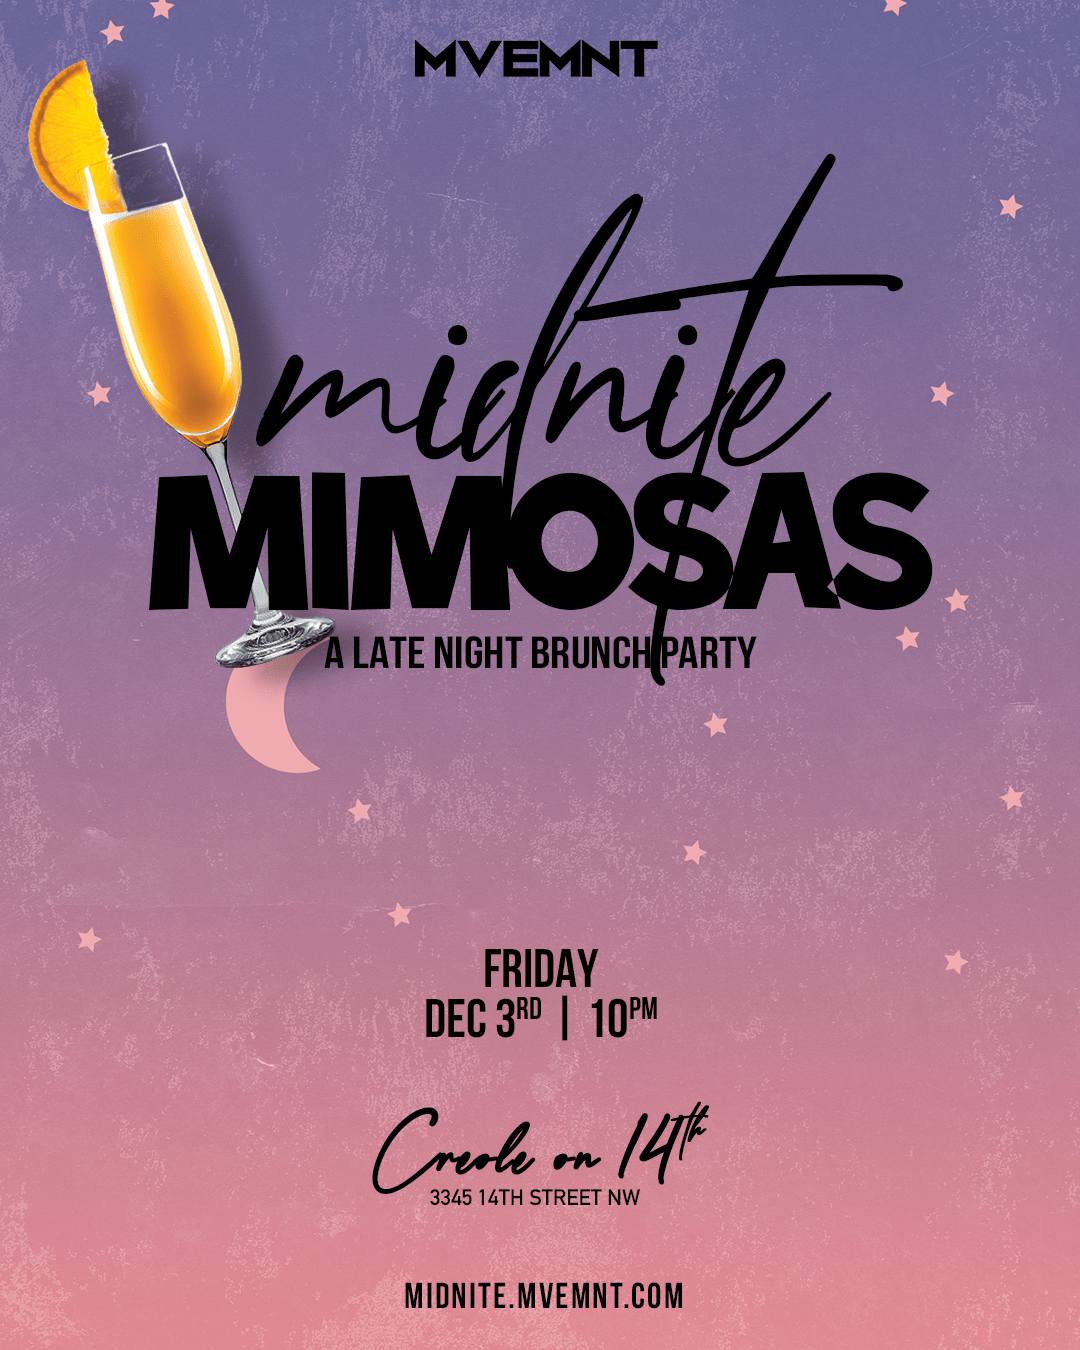 Midnite Mimosas - A Late Night Brunch Party - MVEMNT